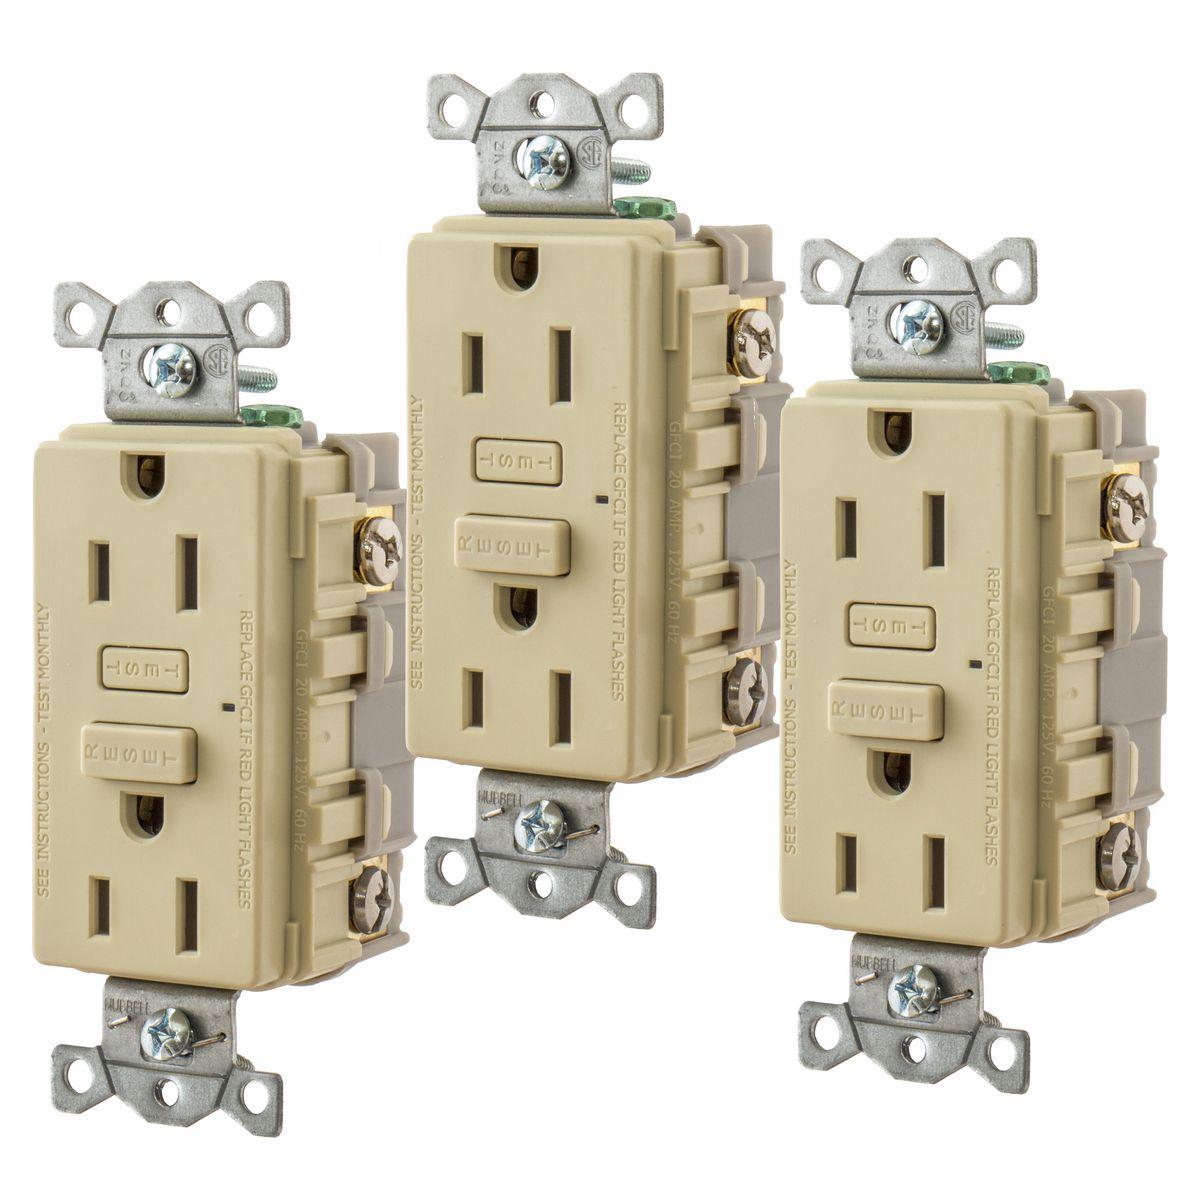 Hubbell GF15I3 HUBBELLPRO, GFCI, 15A, 3 Pack, Ivory. 